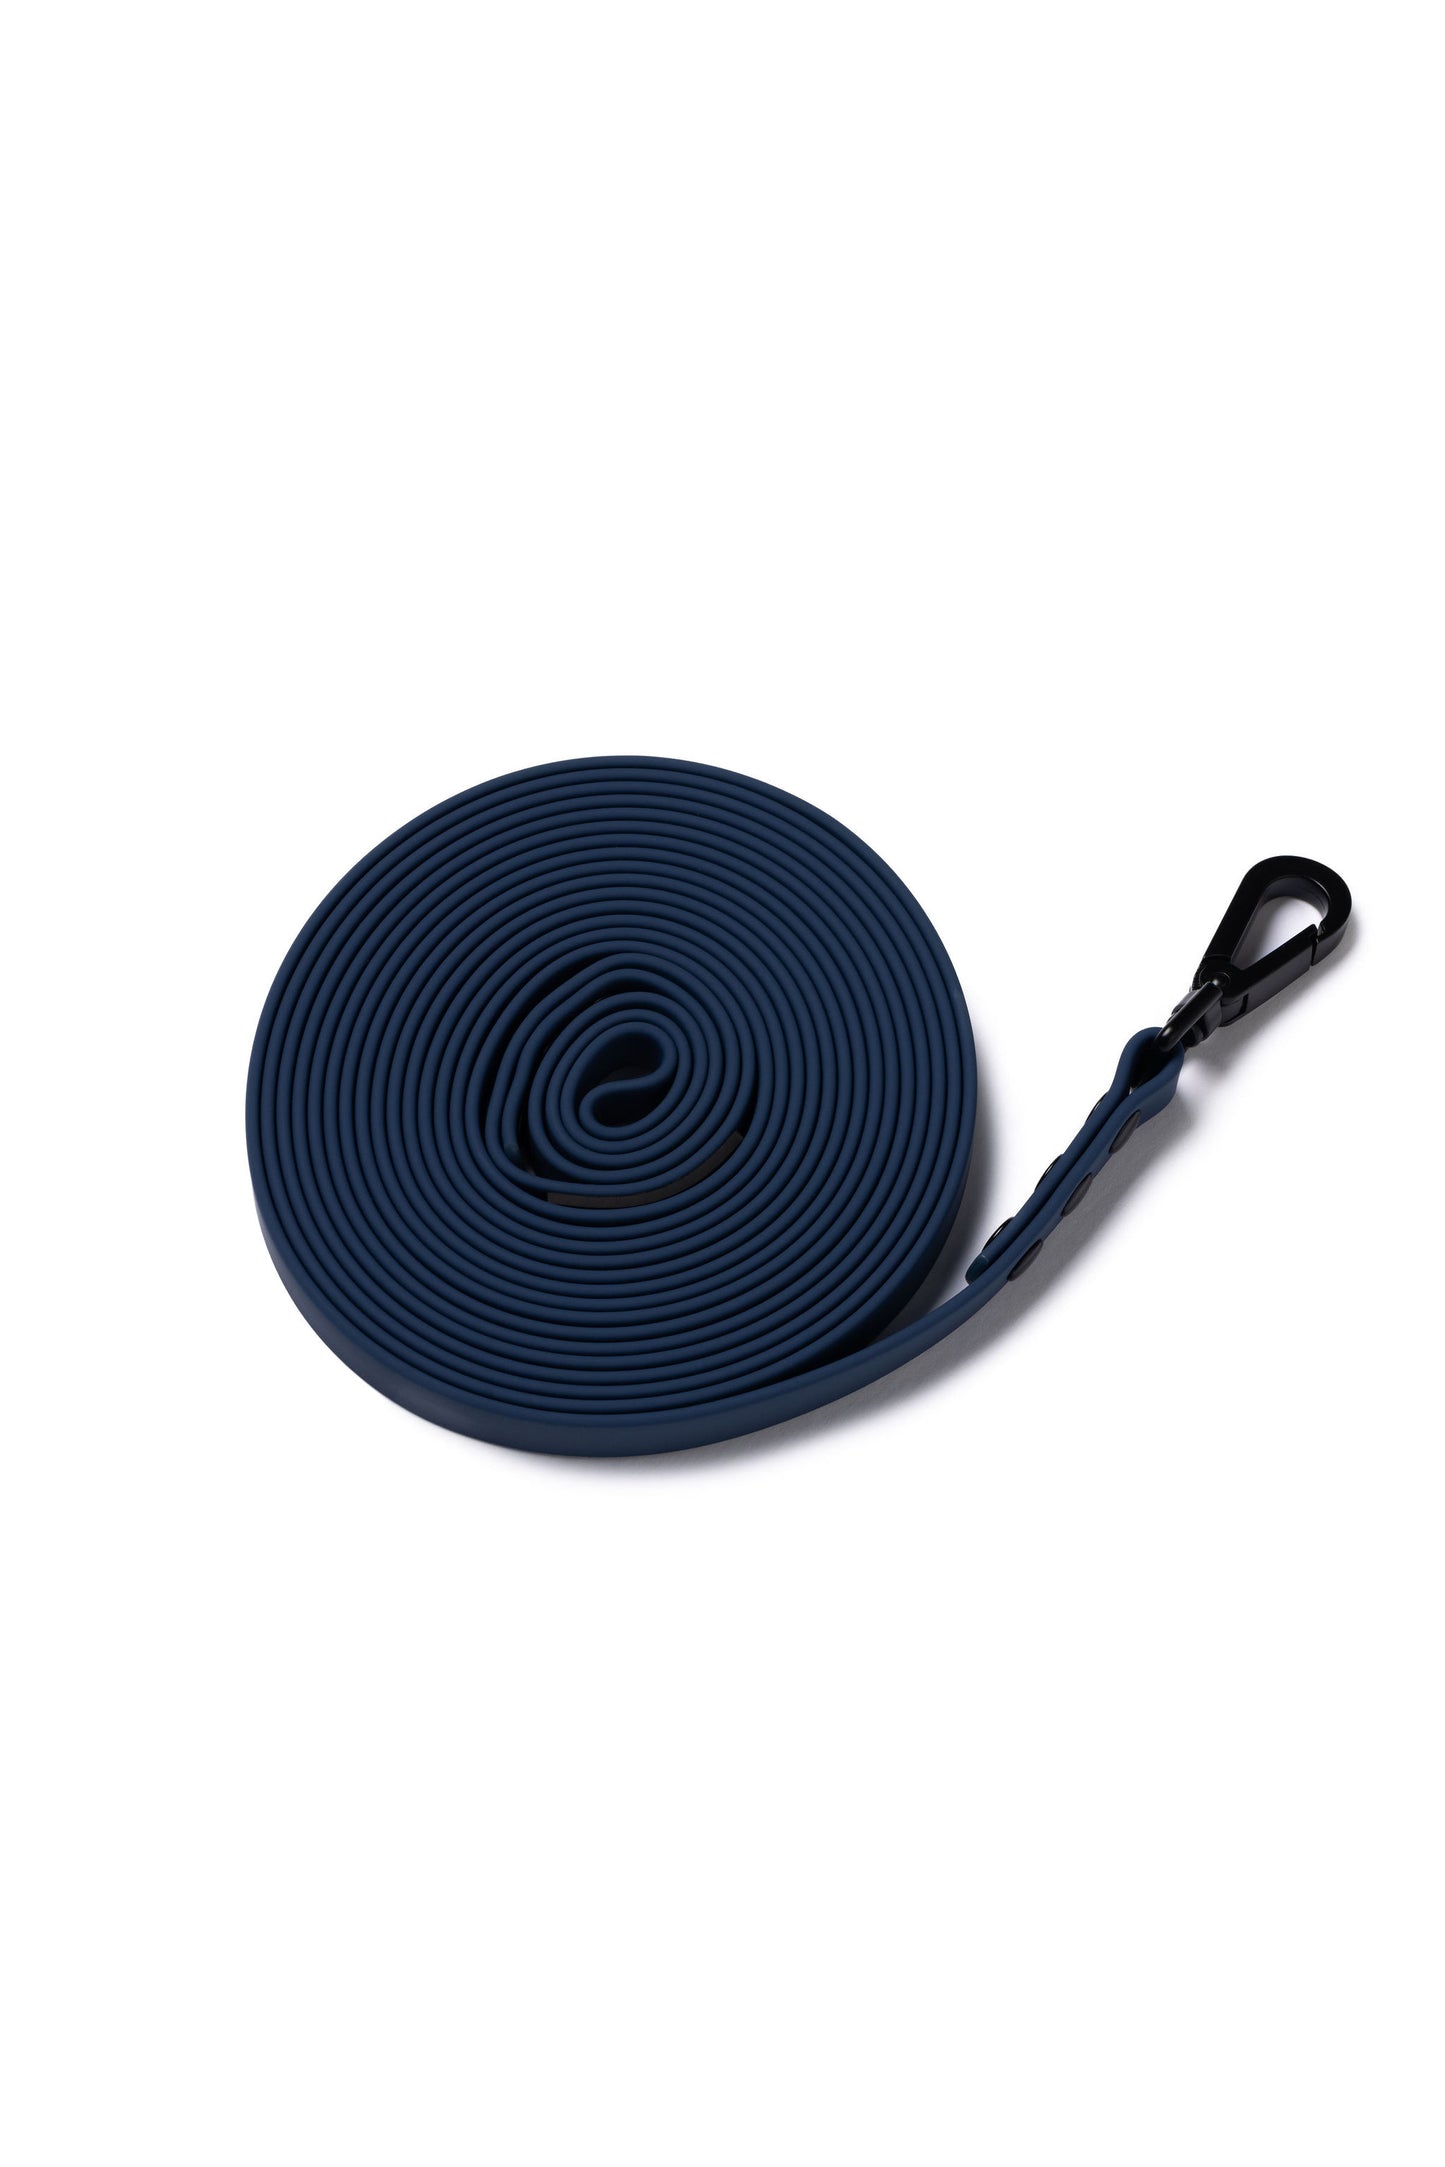 A navy 5m rubber coated lead rolled up and laid flat on a white background.